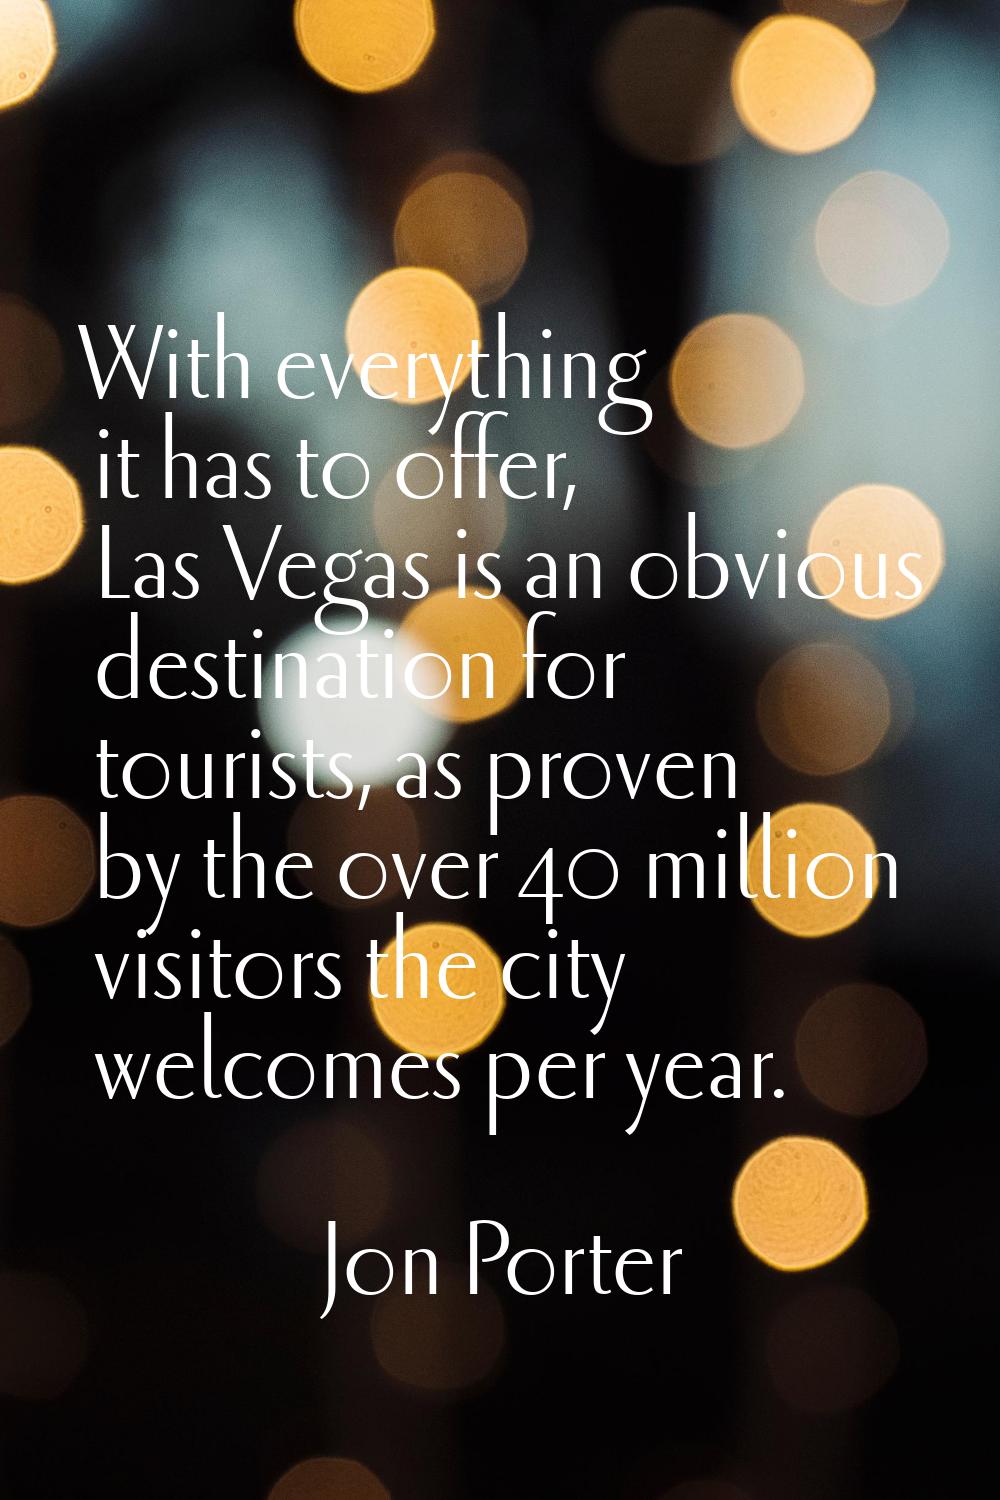 With everything it has to offer, Las Vegas is an obvious destination for tourists, as proven by the